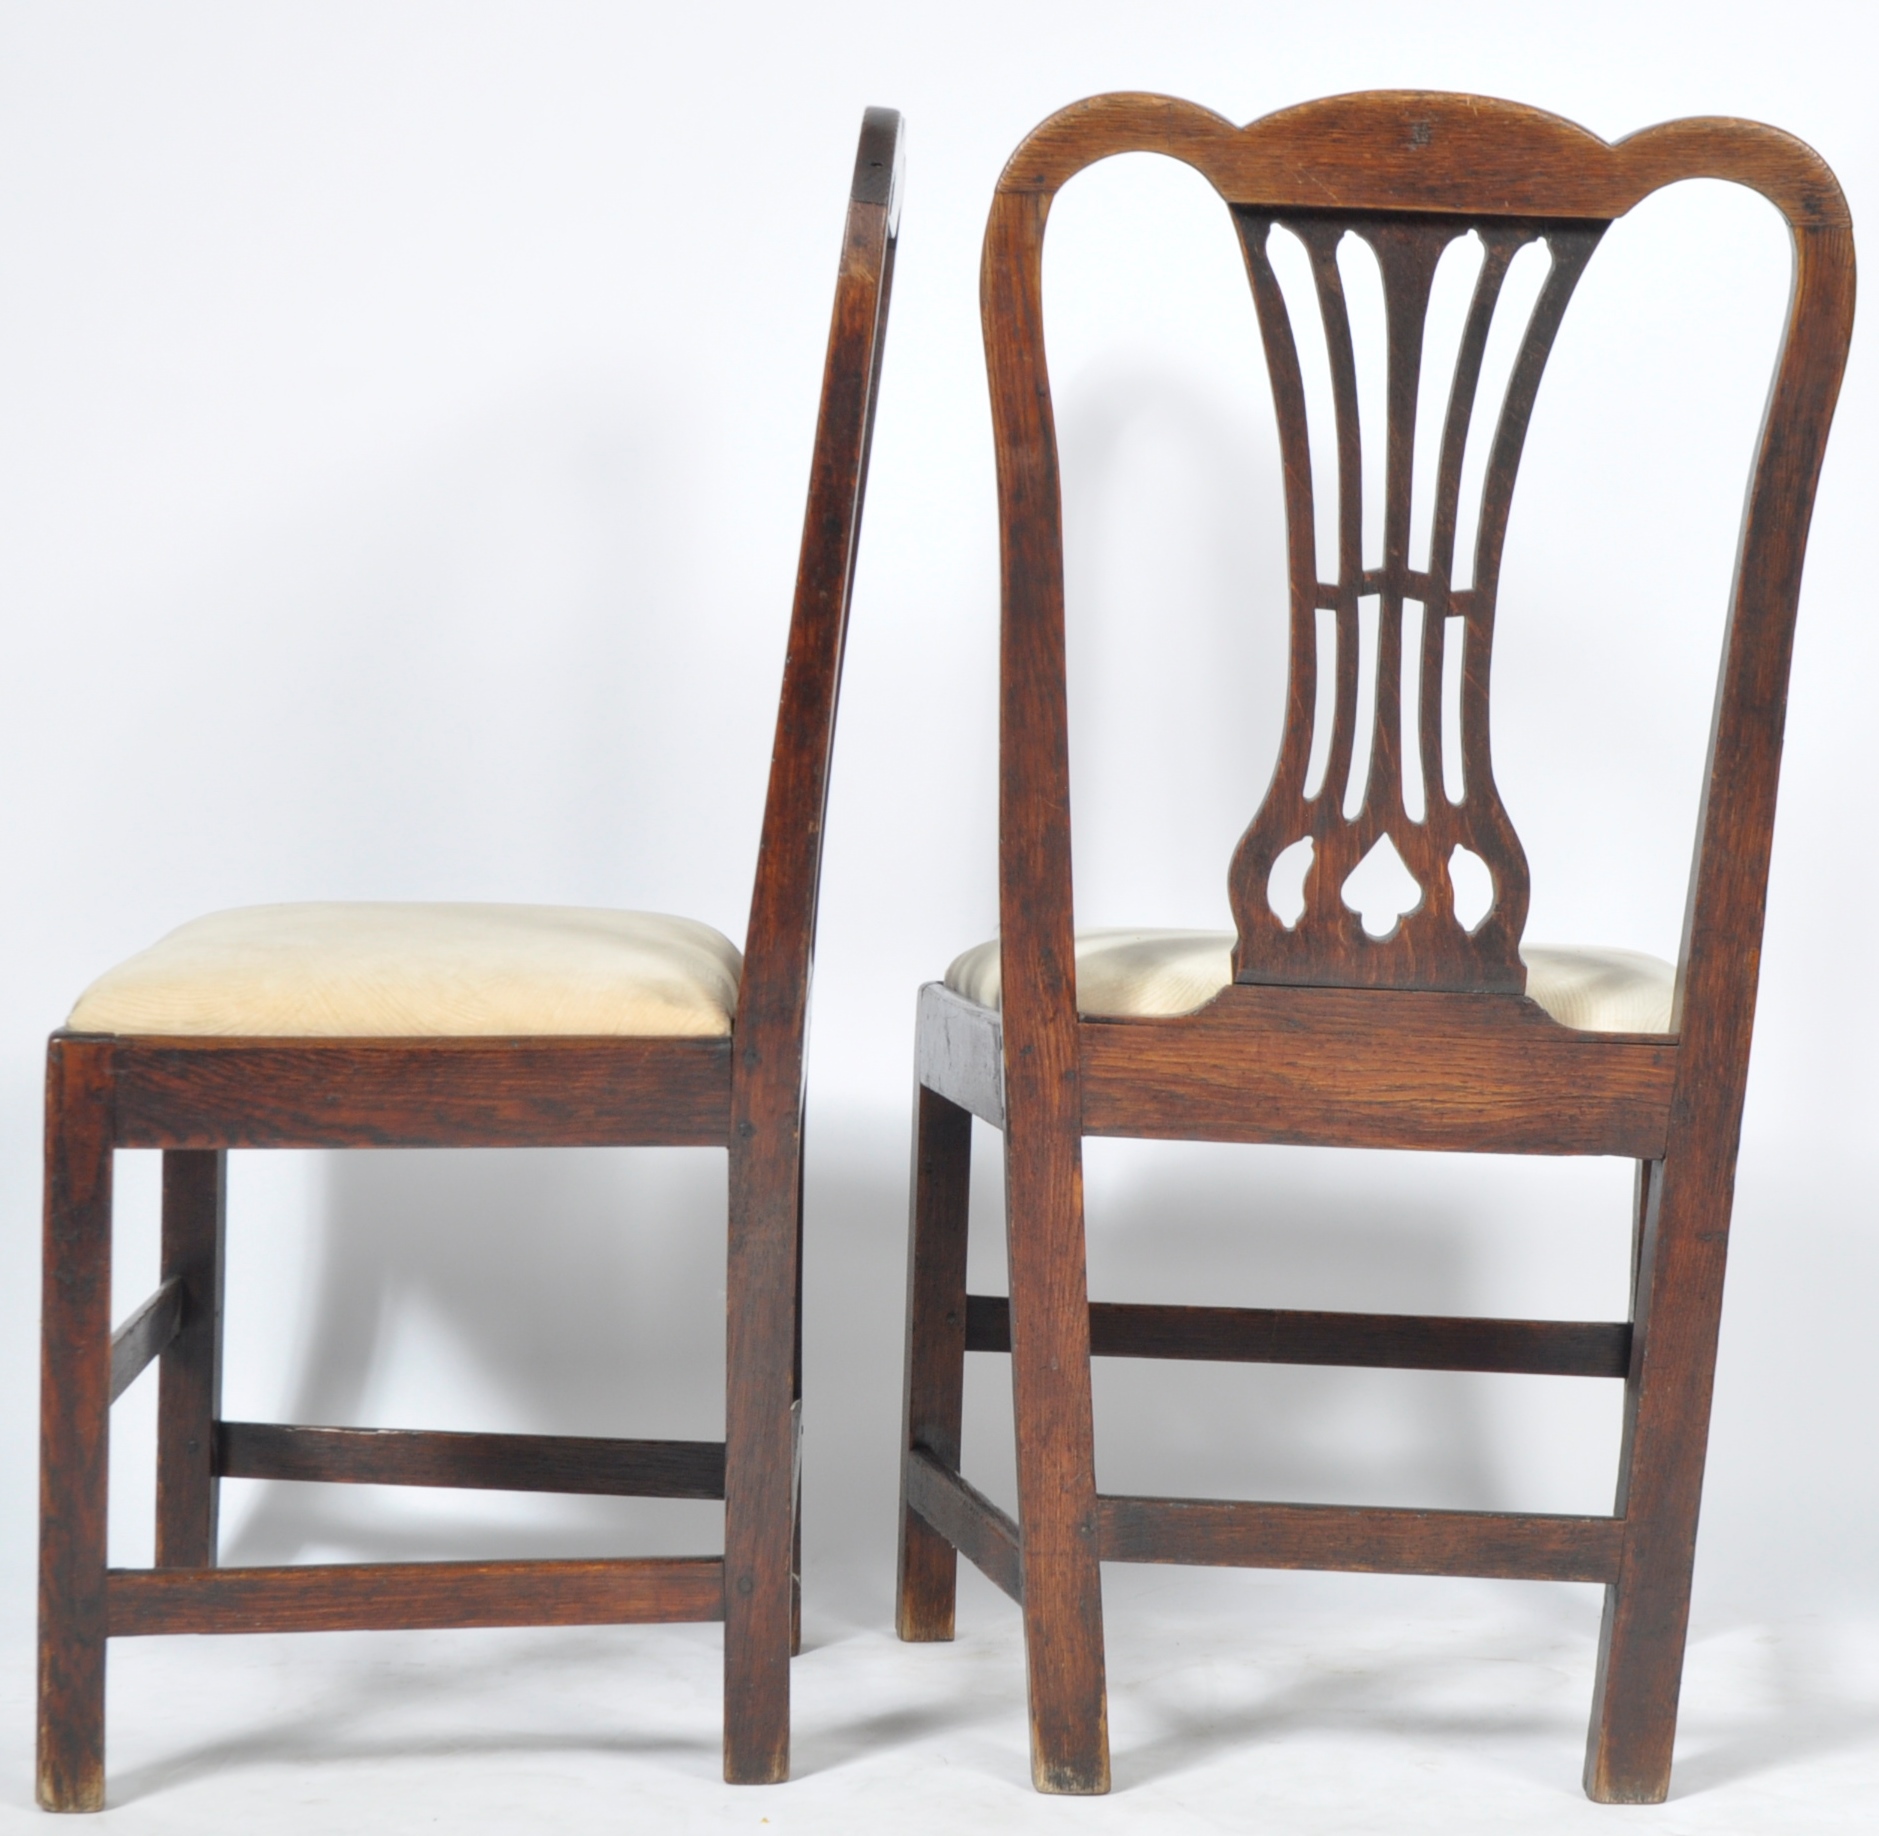 PAIR OF 18TH CENTURY CHIPPENDALE INFLUENCE ELM & OAK CHAIRS - Image 6 of 6